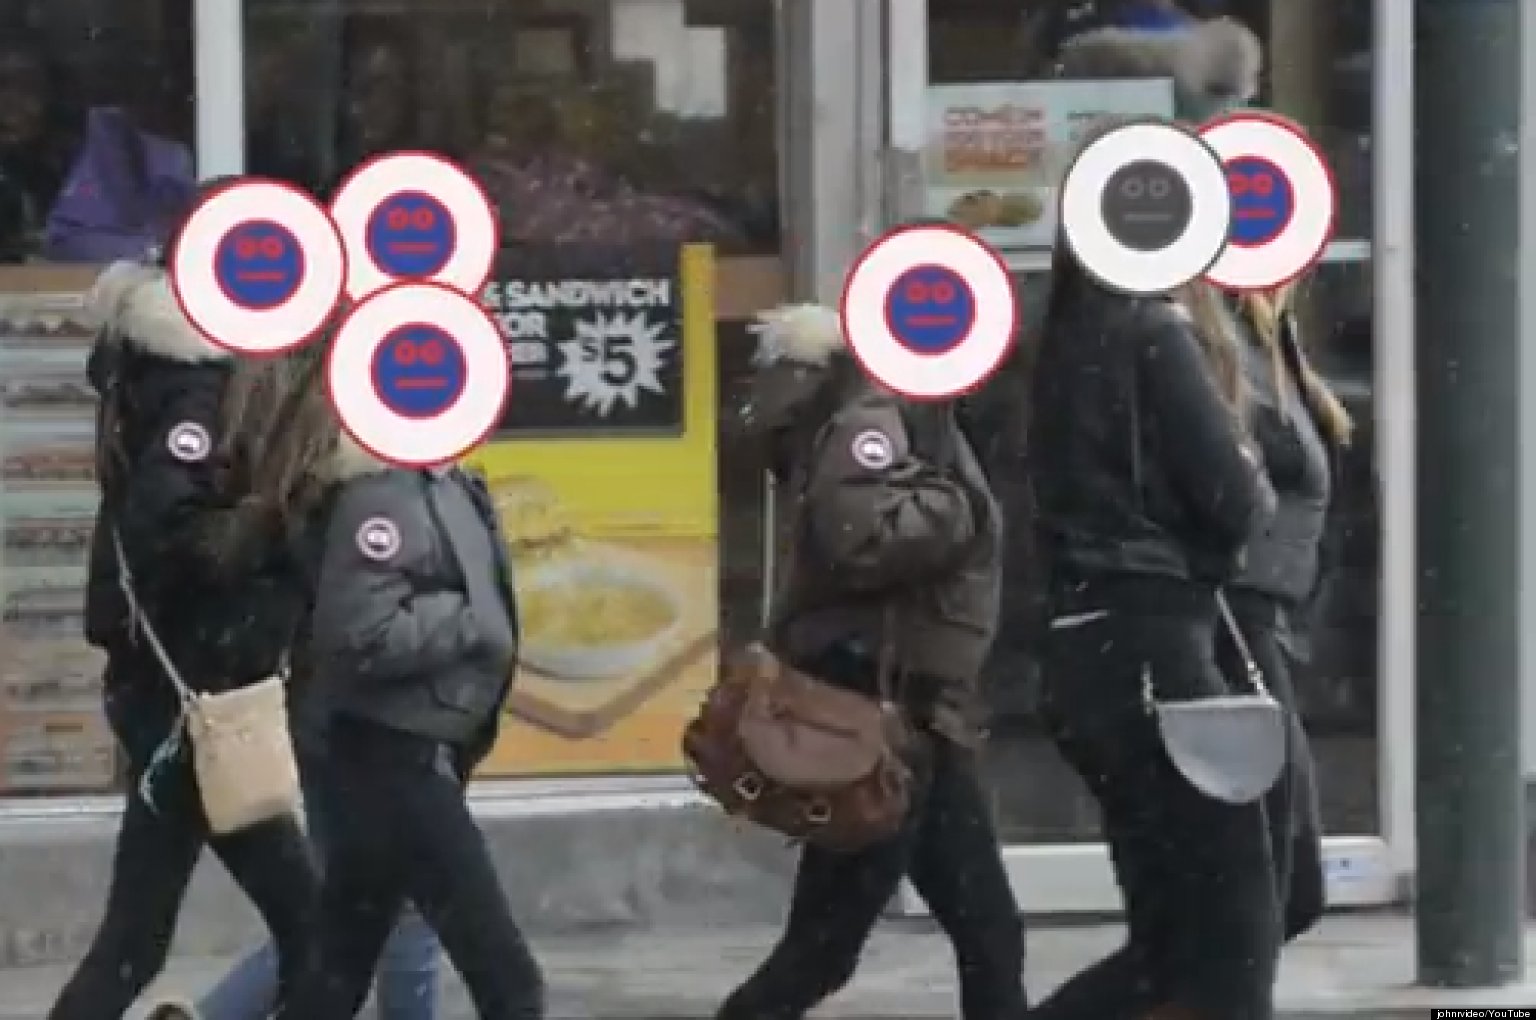 Canada Goose toronto outlet discounts - Omnipresent Canada Goose Coats Mocked In Toronto Music Video